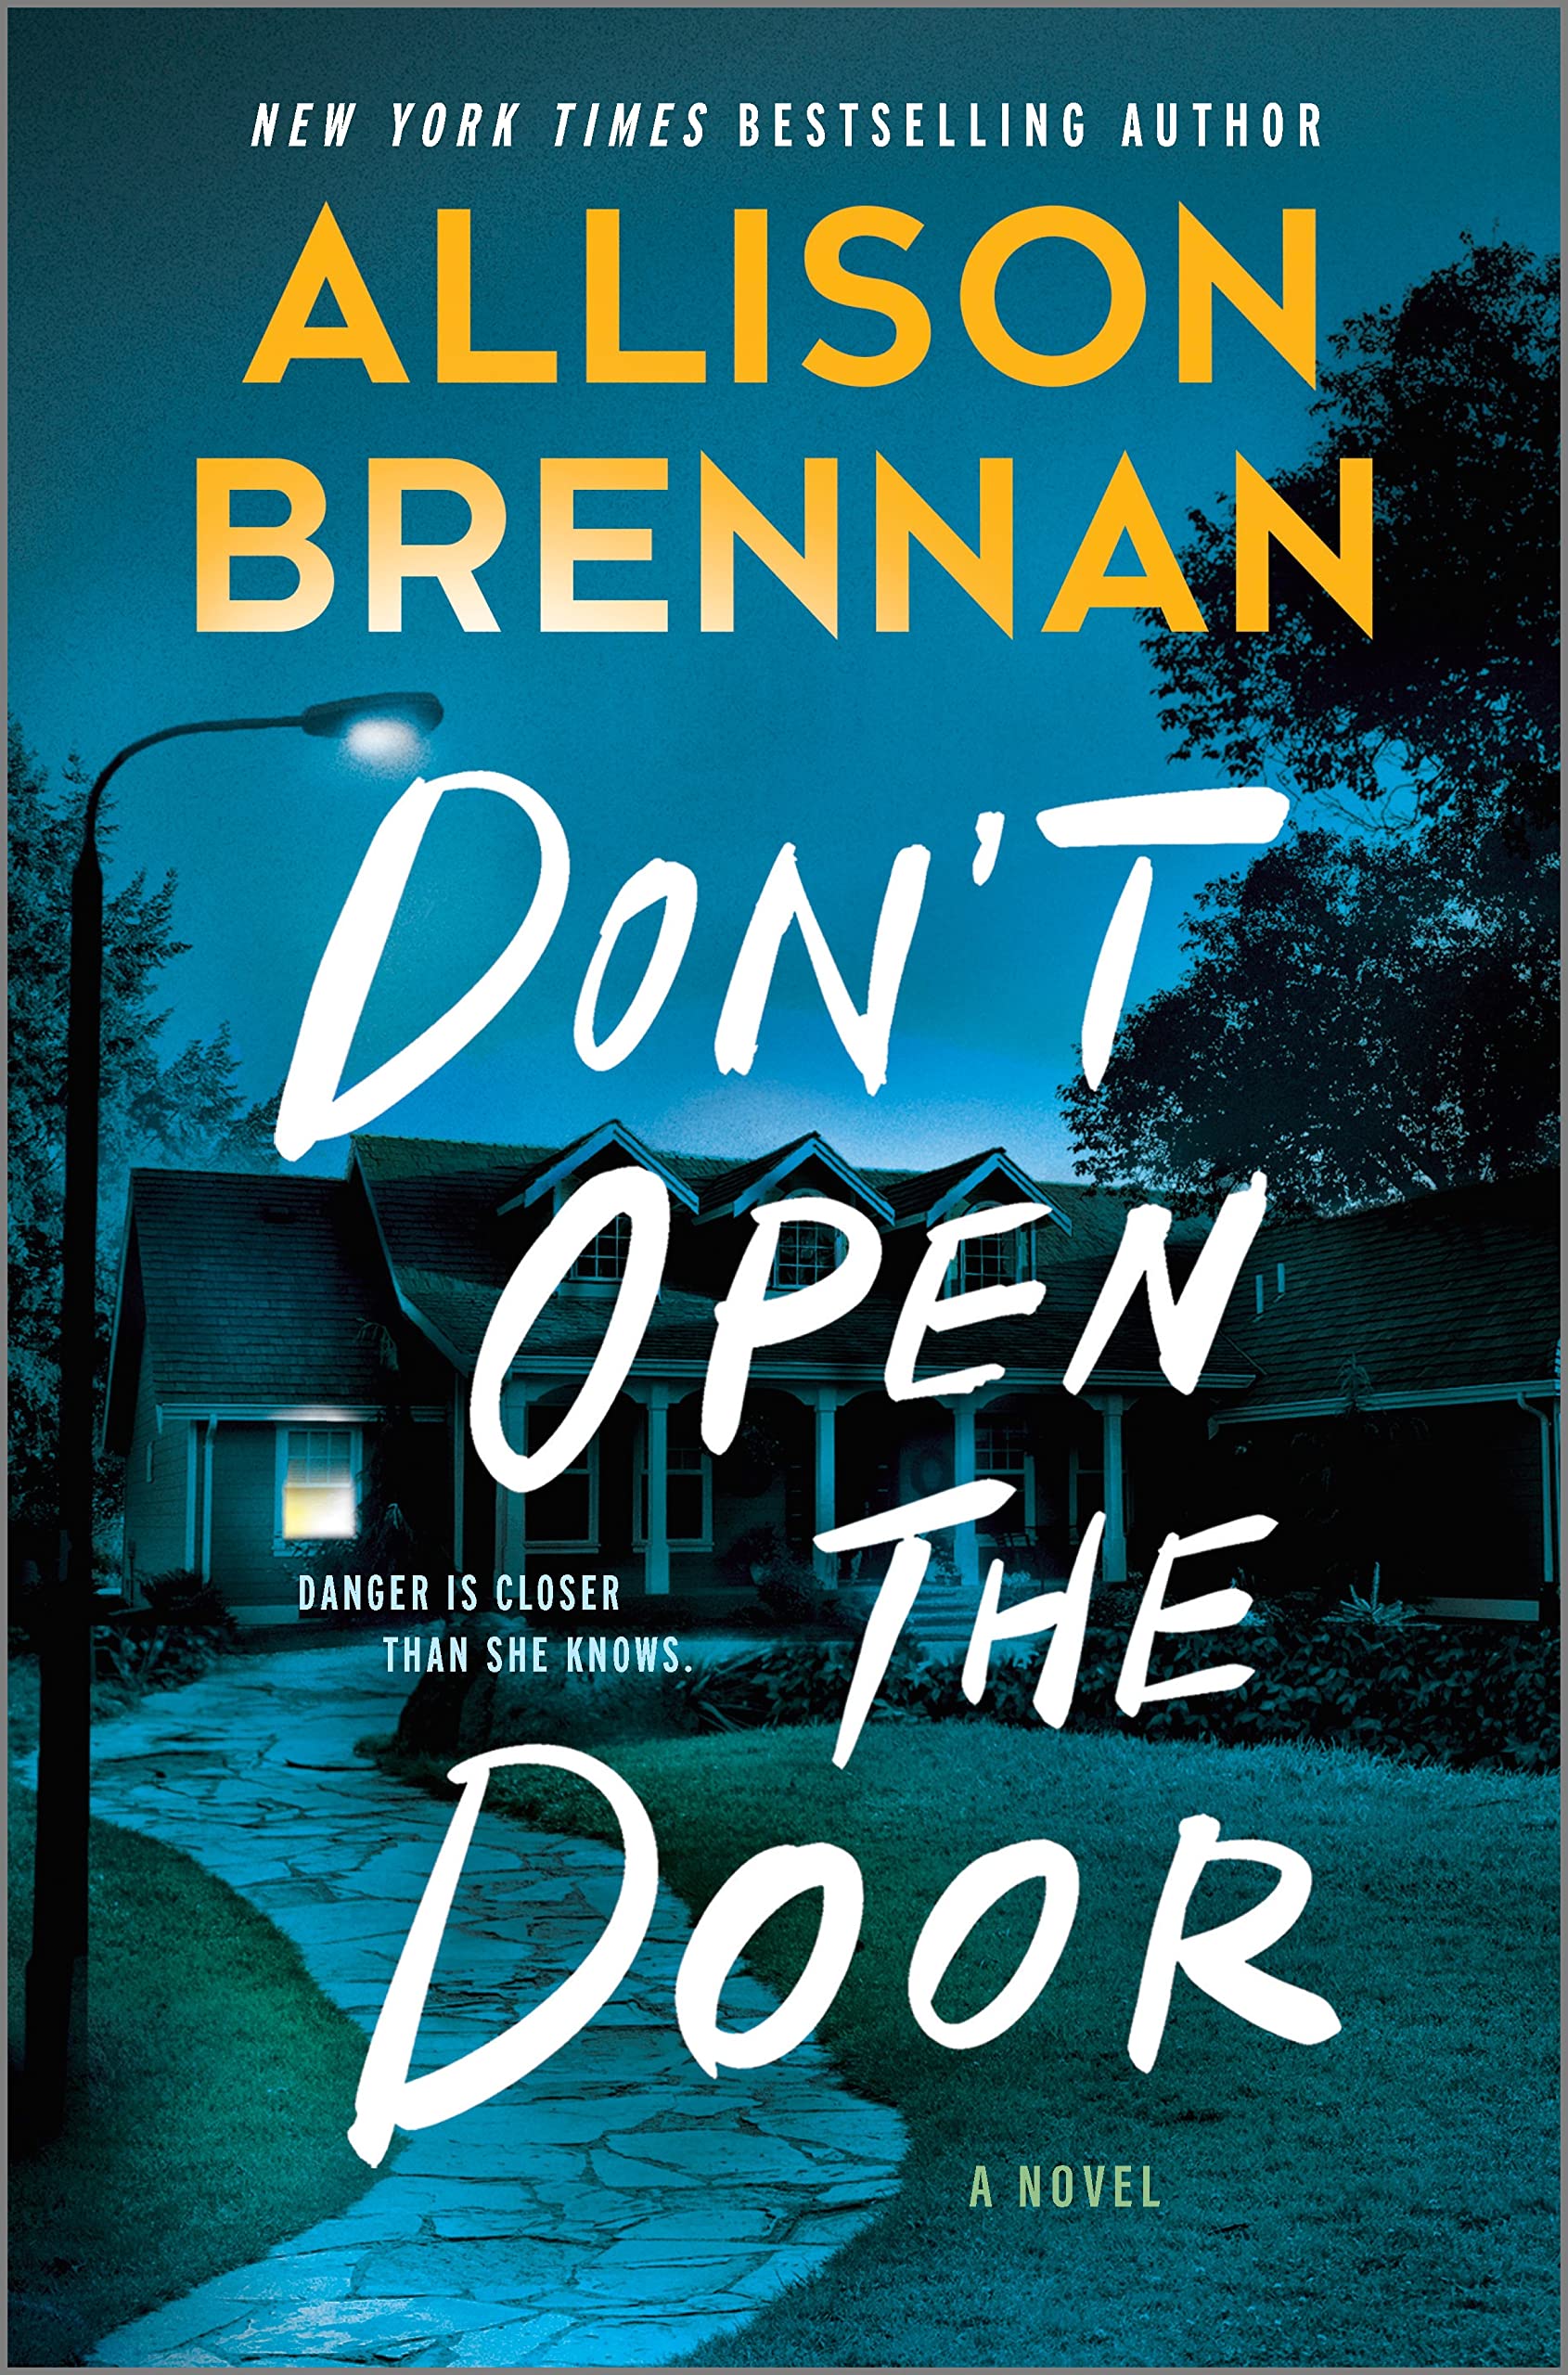 Image for "Don't Open the Door"